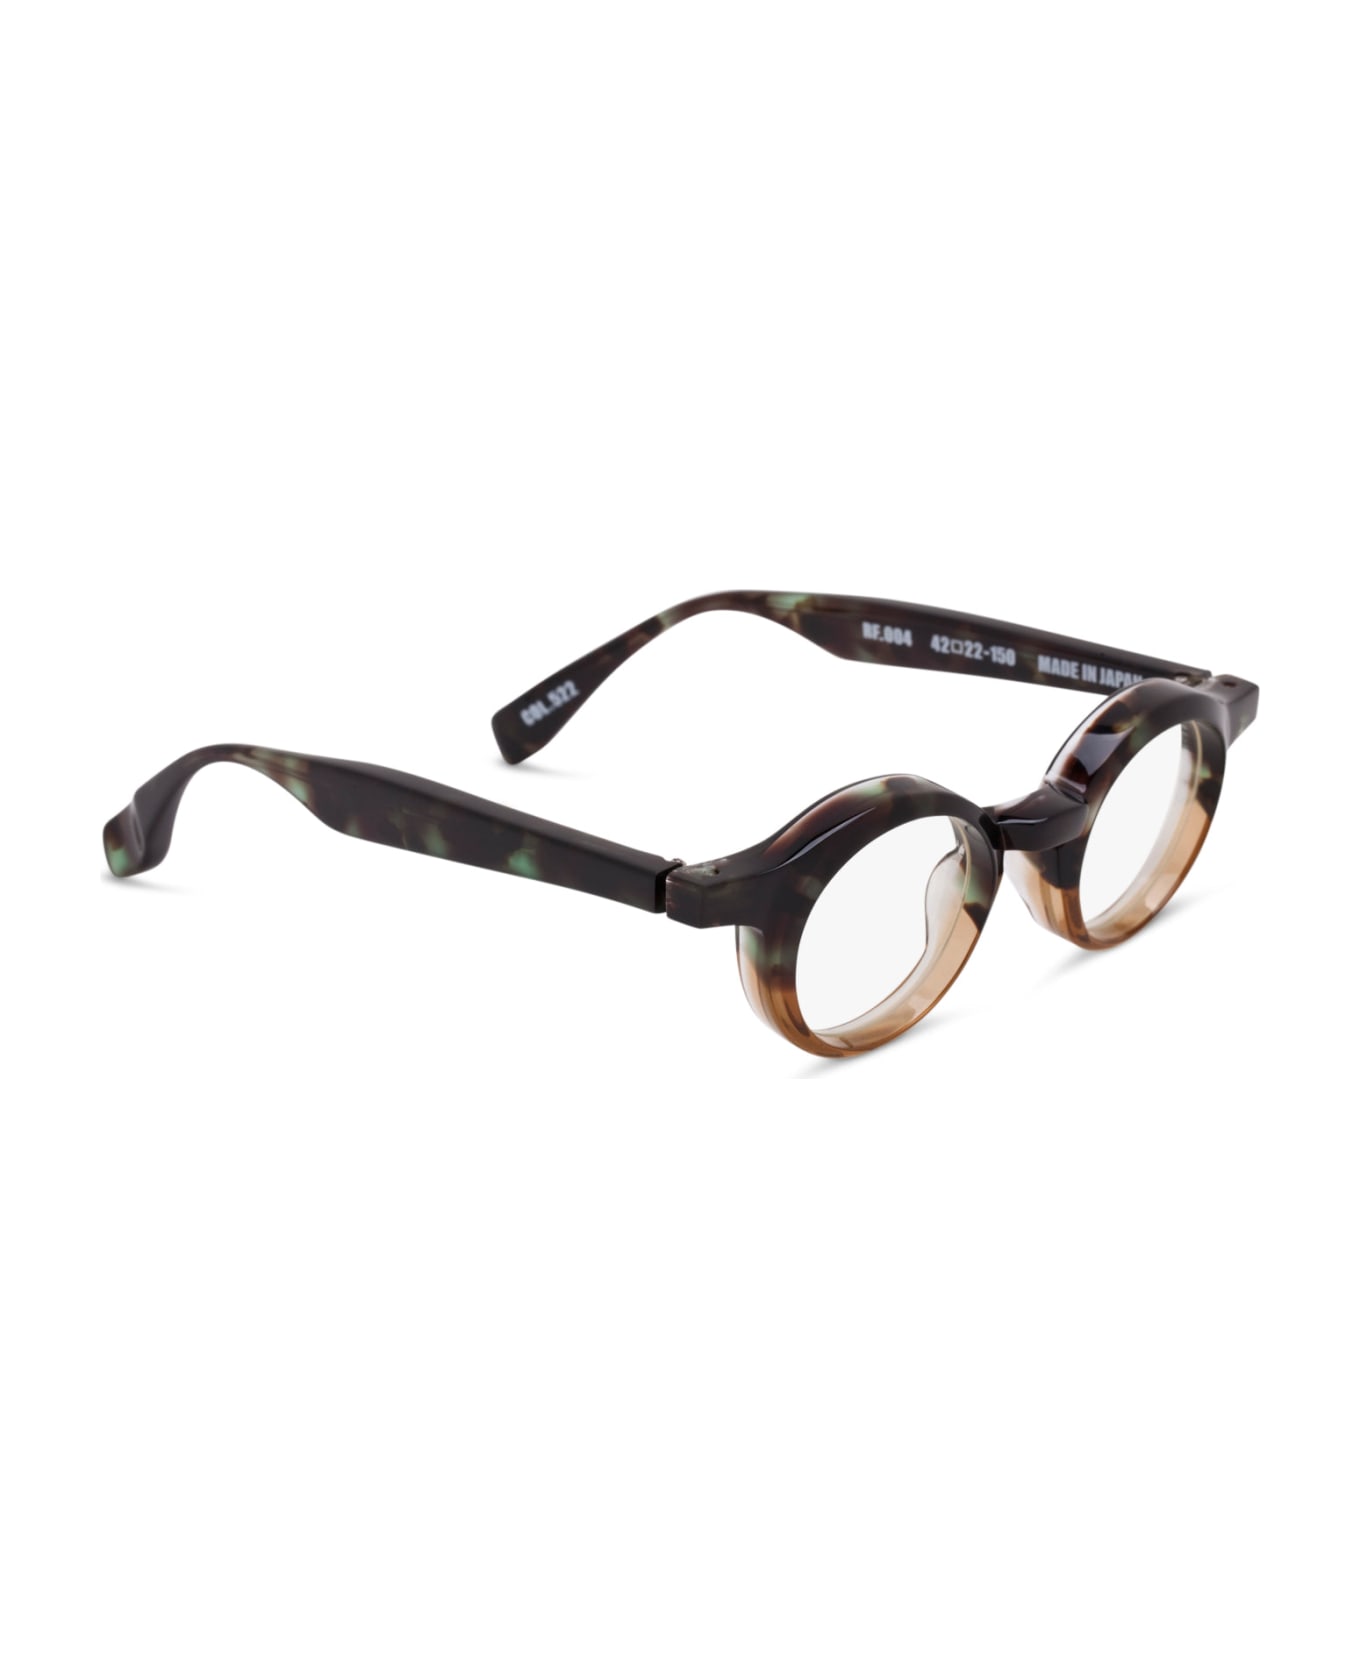 FACTORY900 Rf 004-522 Glasses - for further details